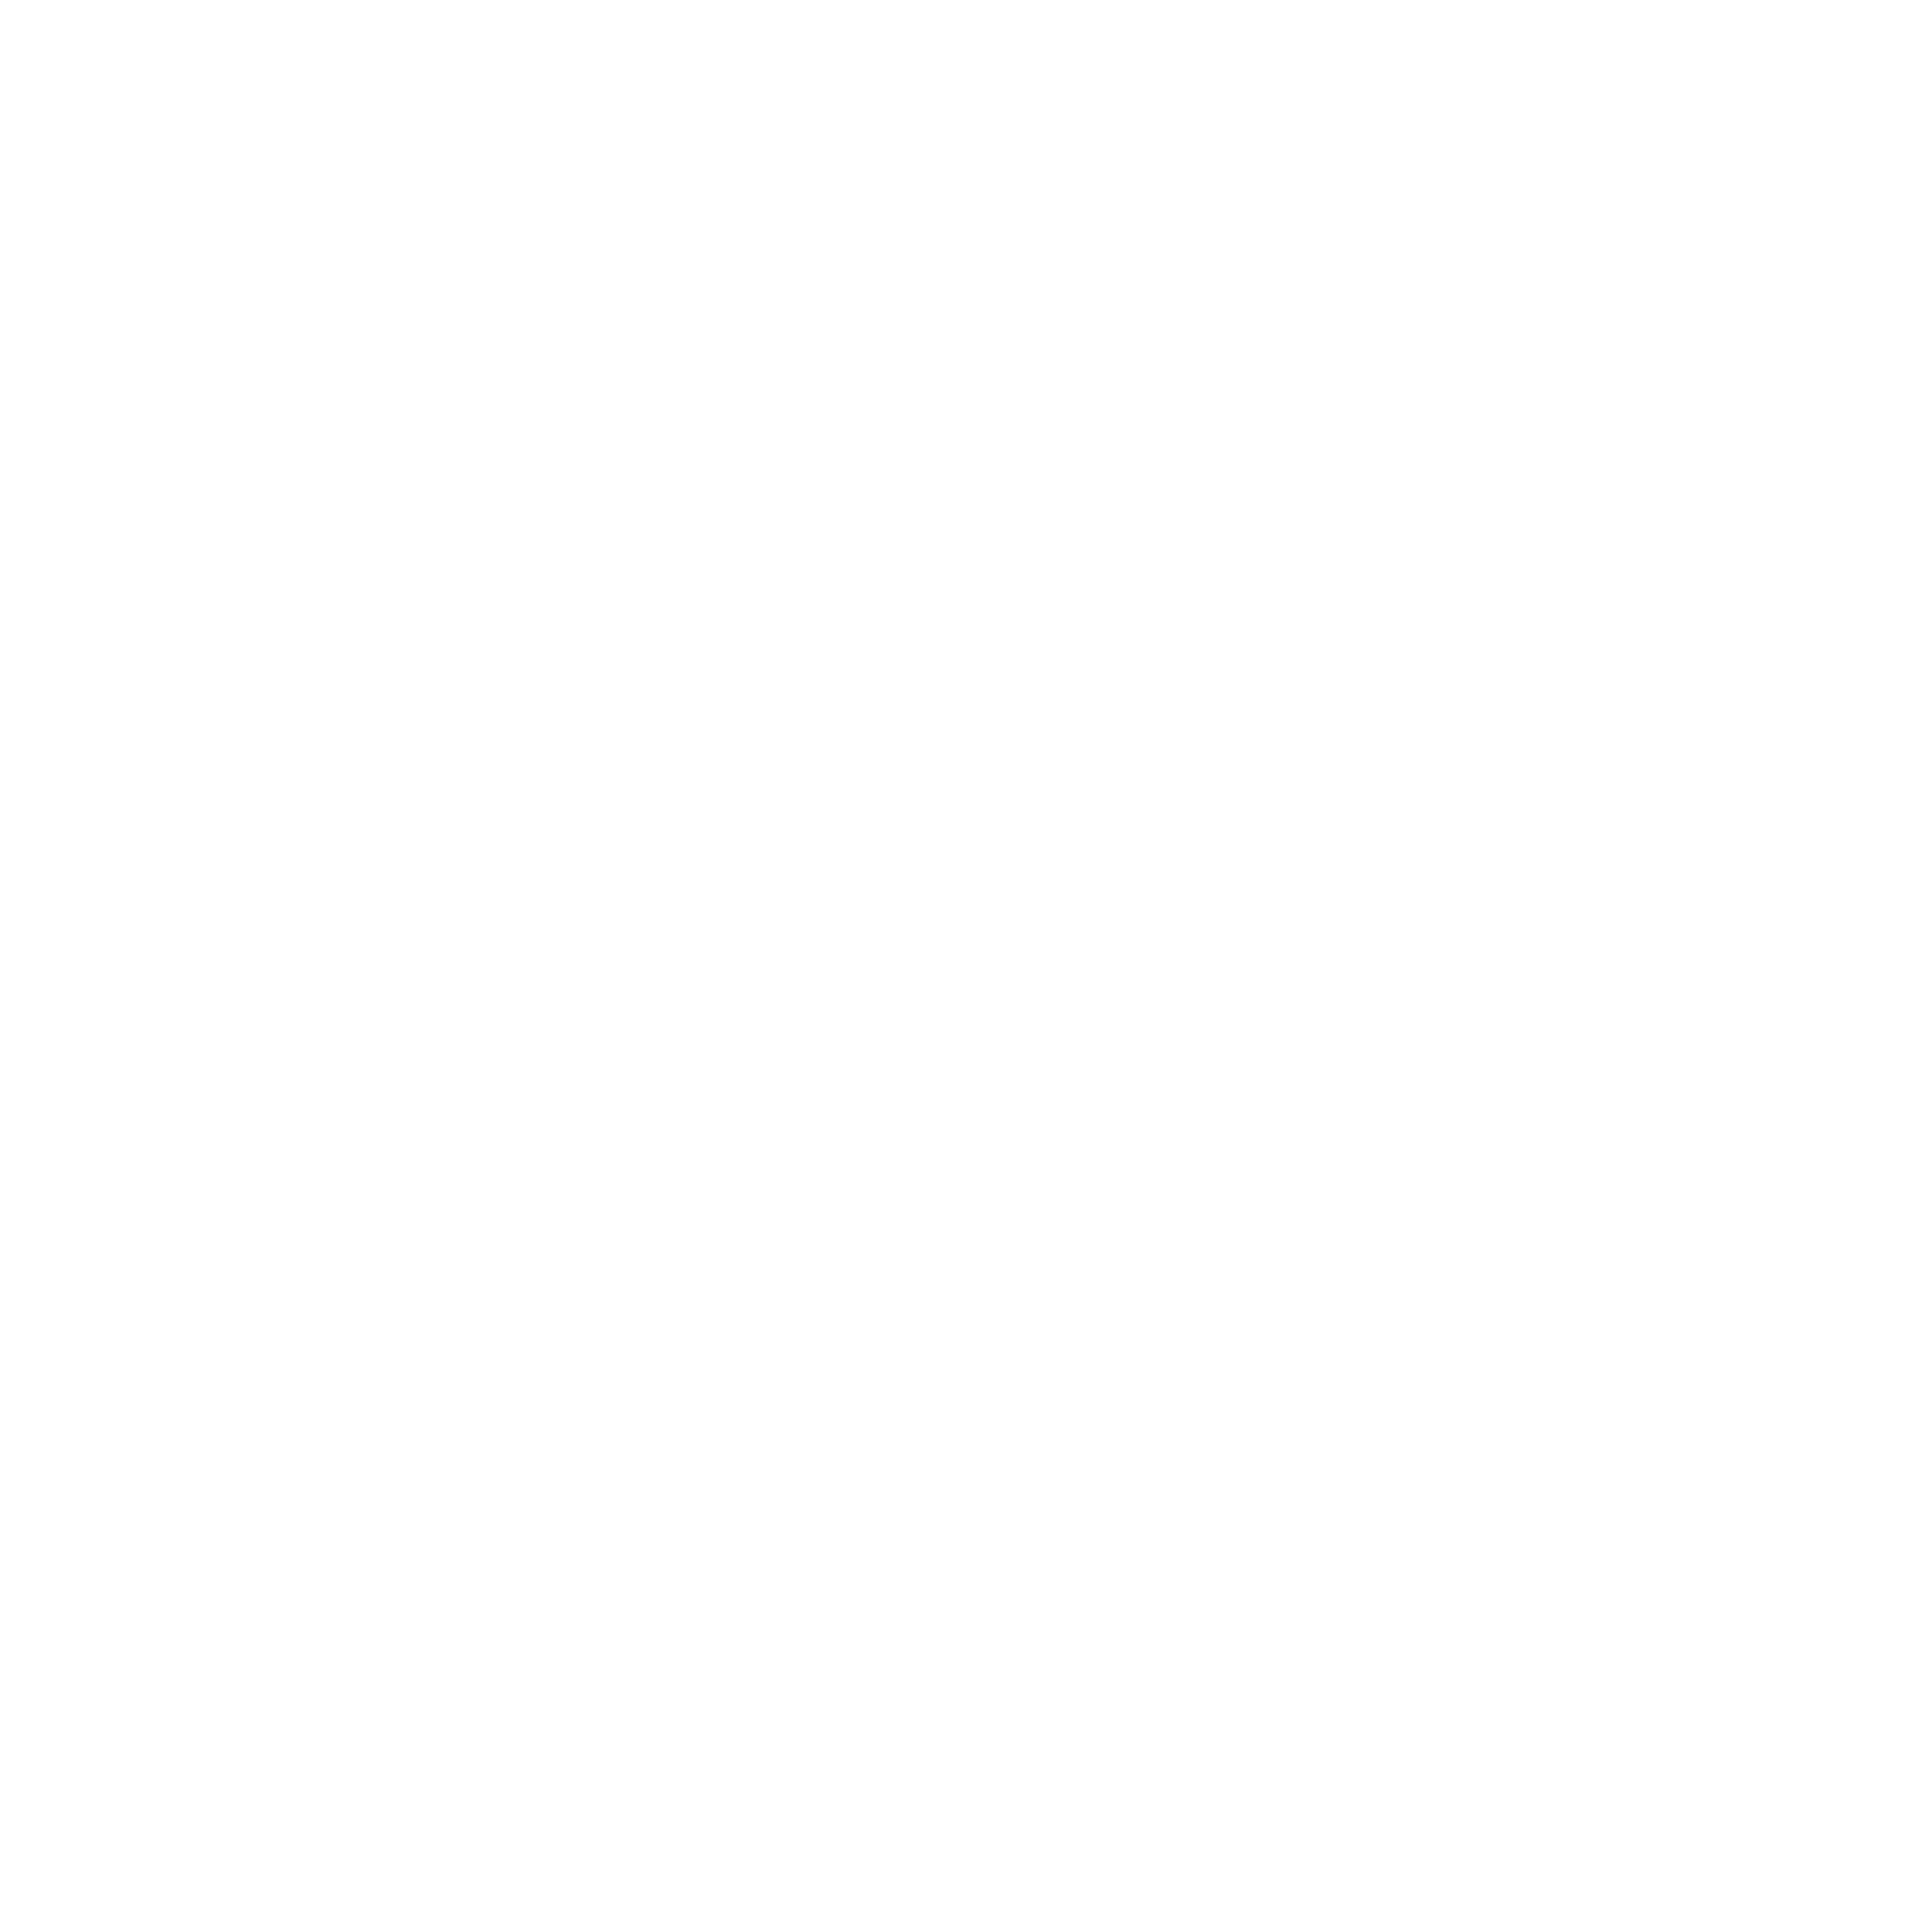 OCCHC Stepping Up - Celebrating 40 years